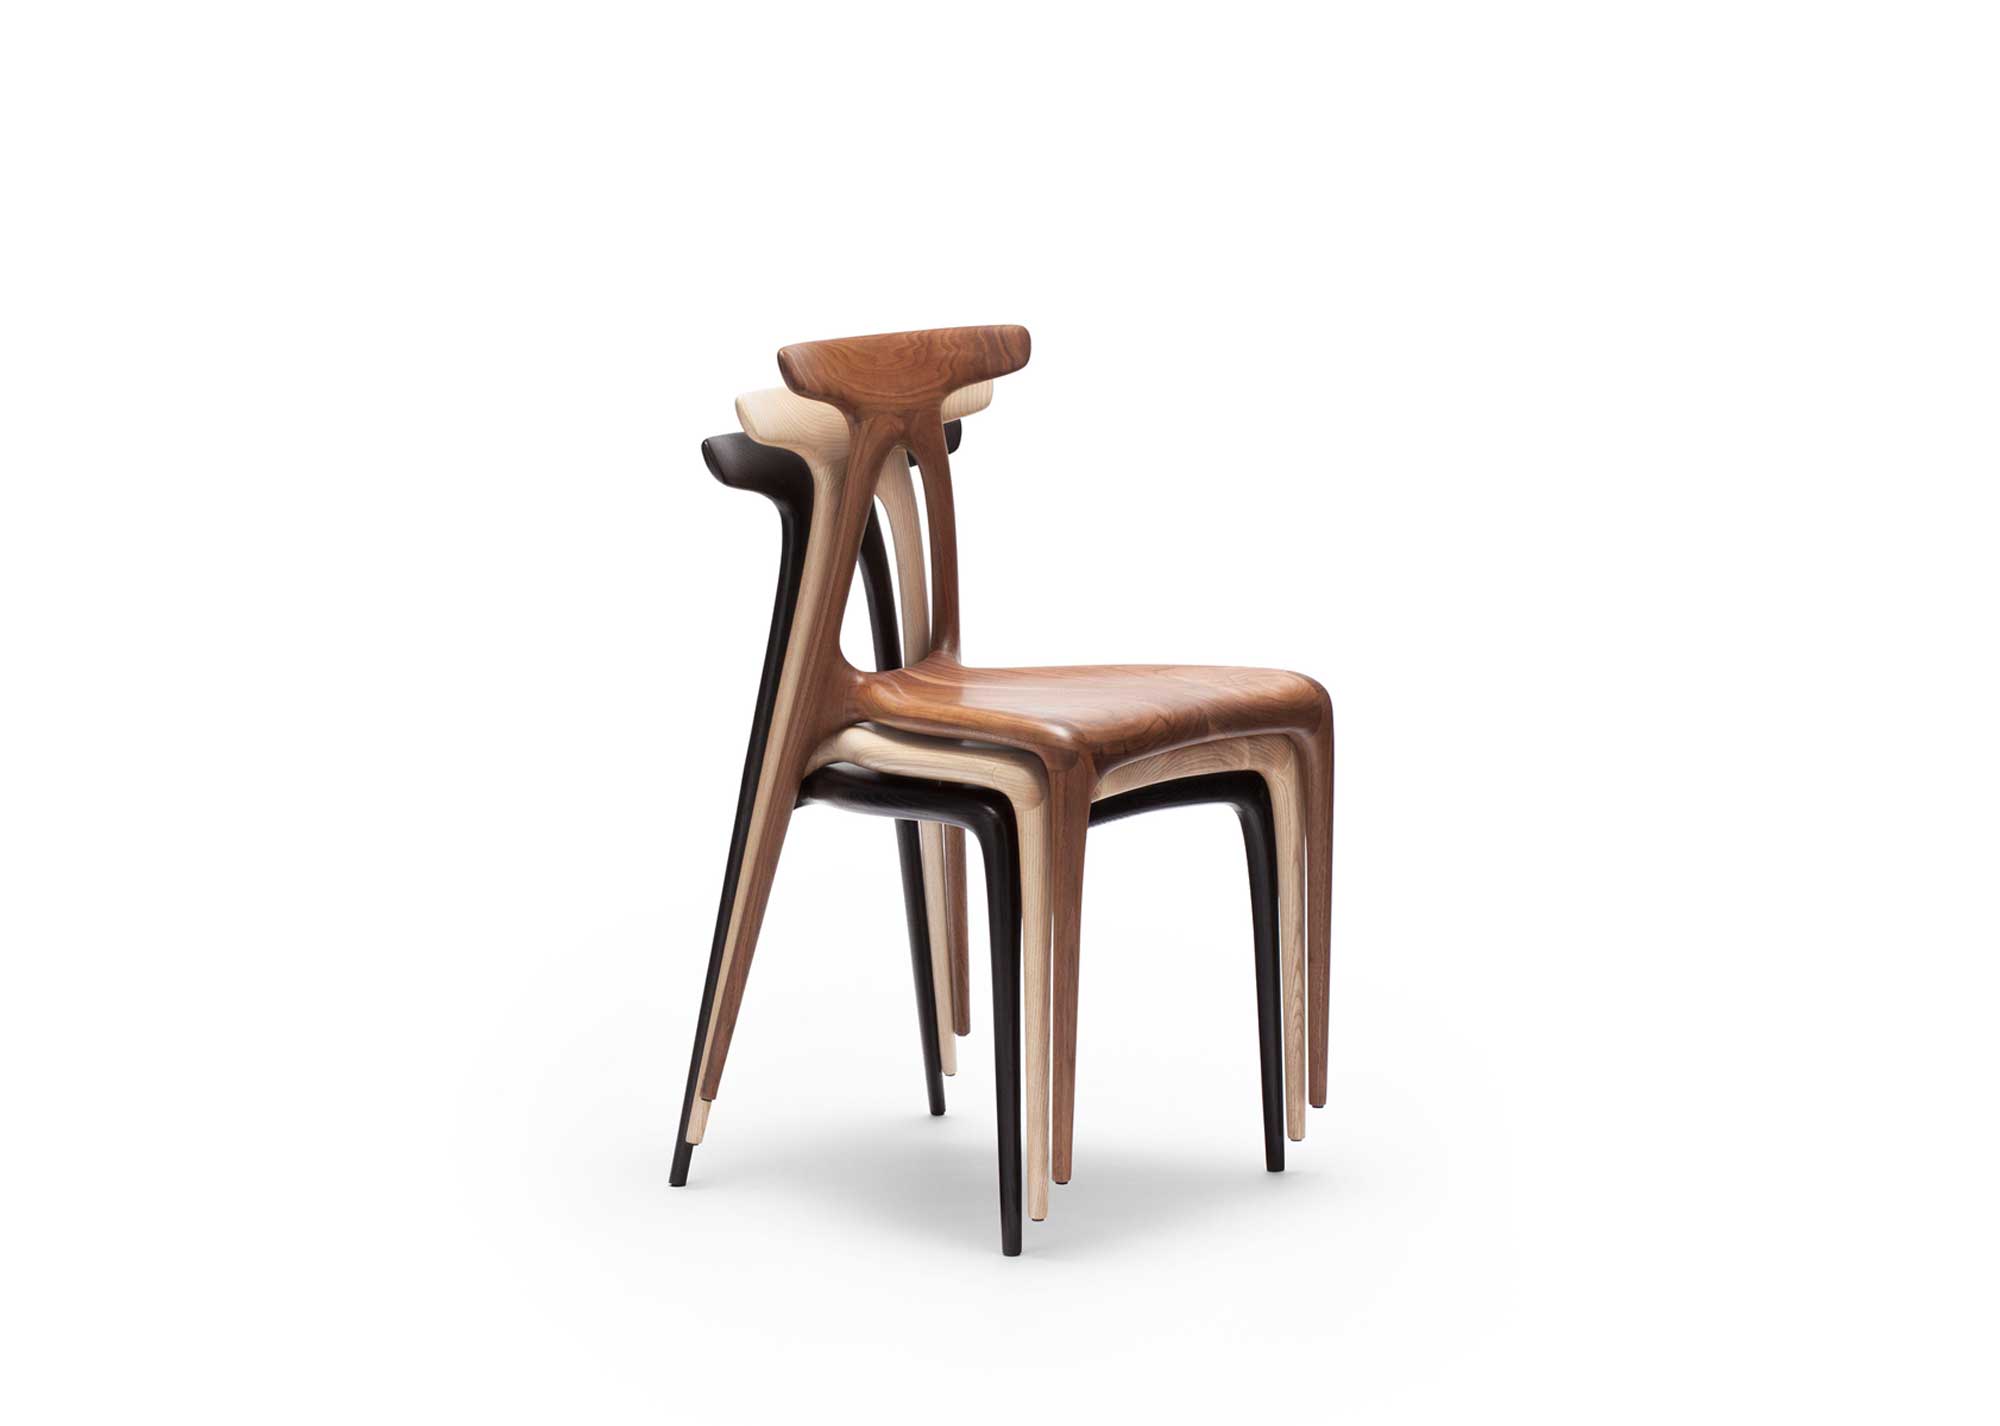 Alpha Chairs by Made In Ratio